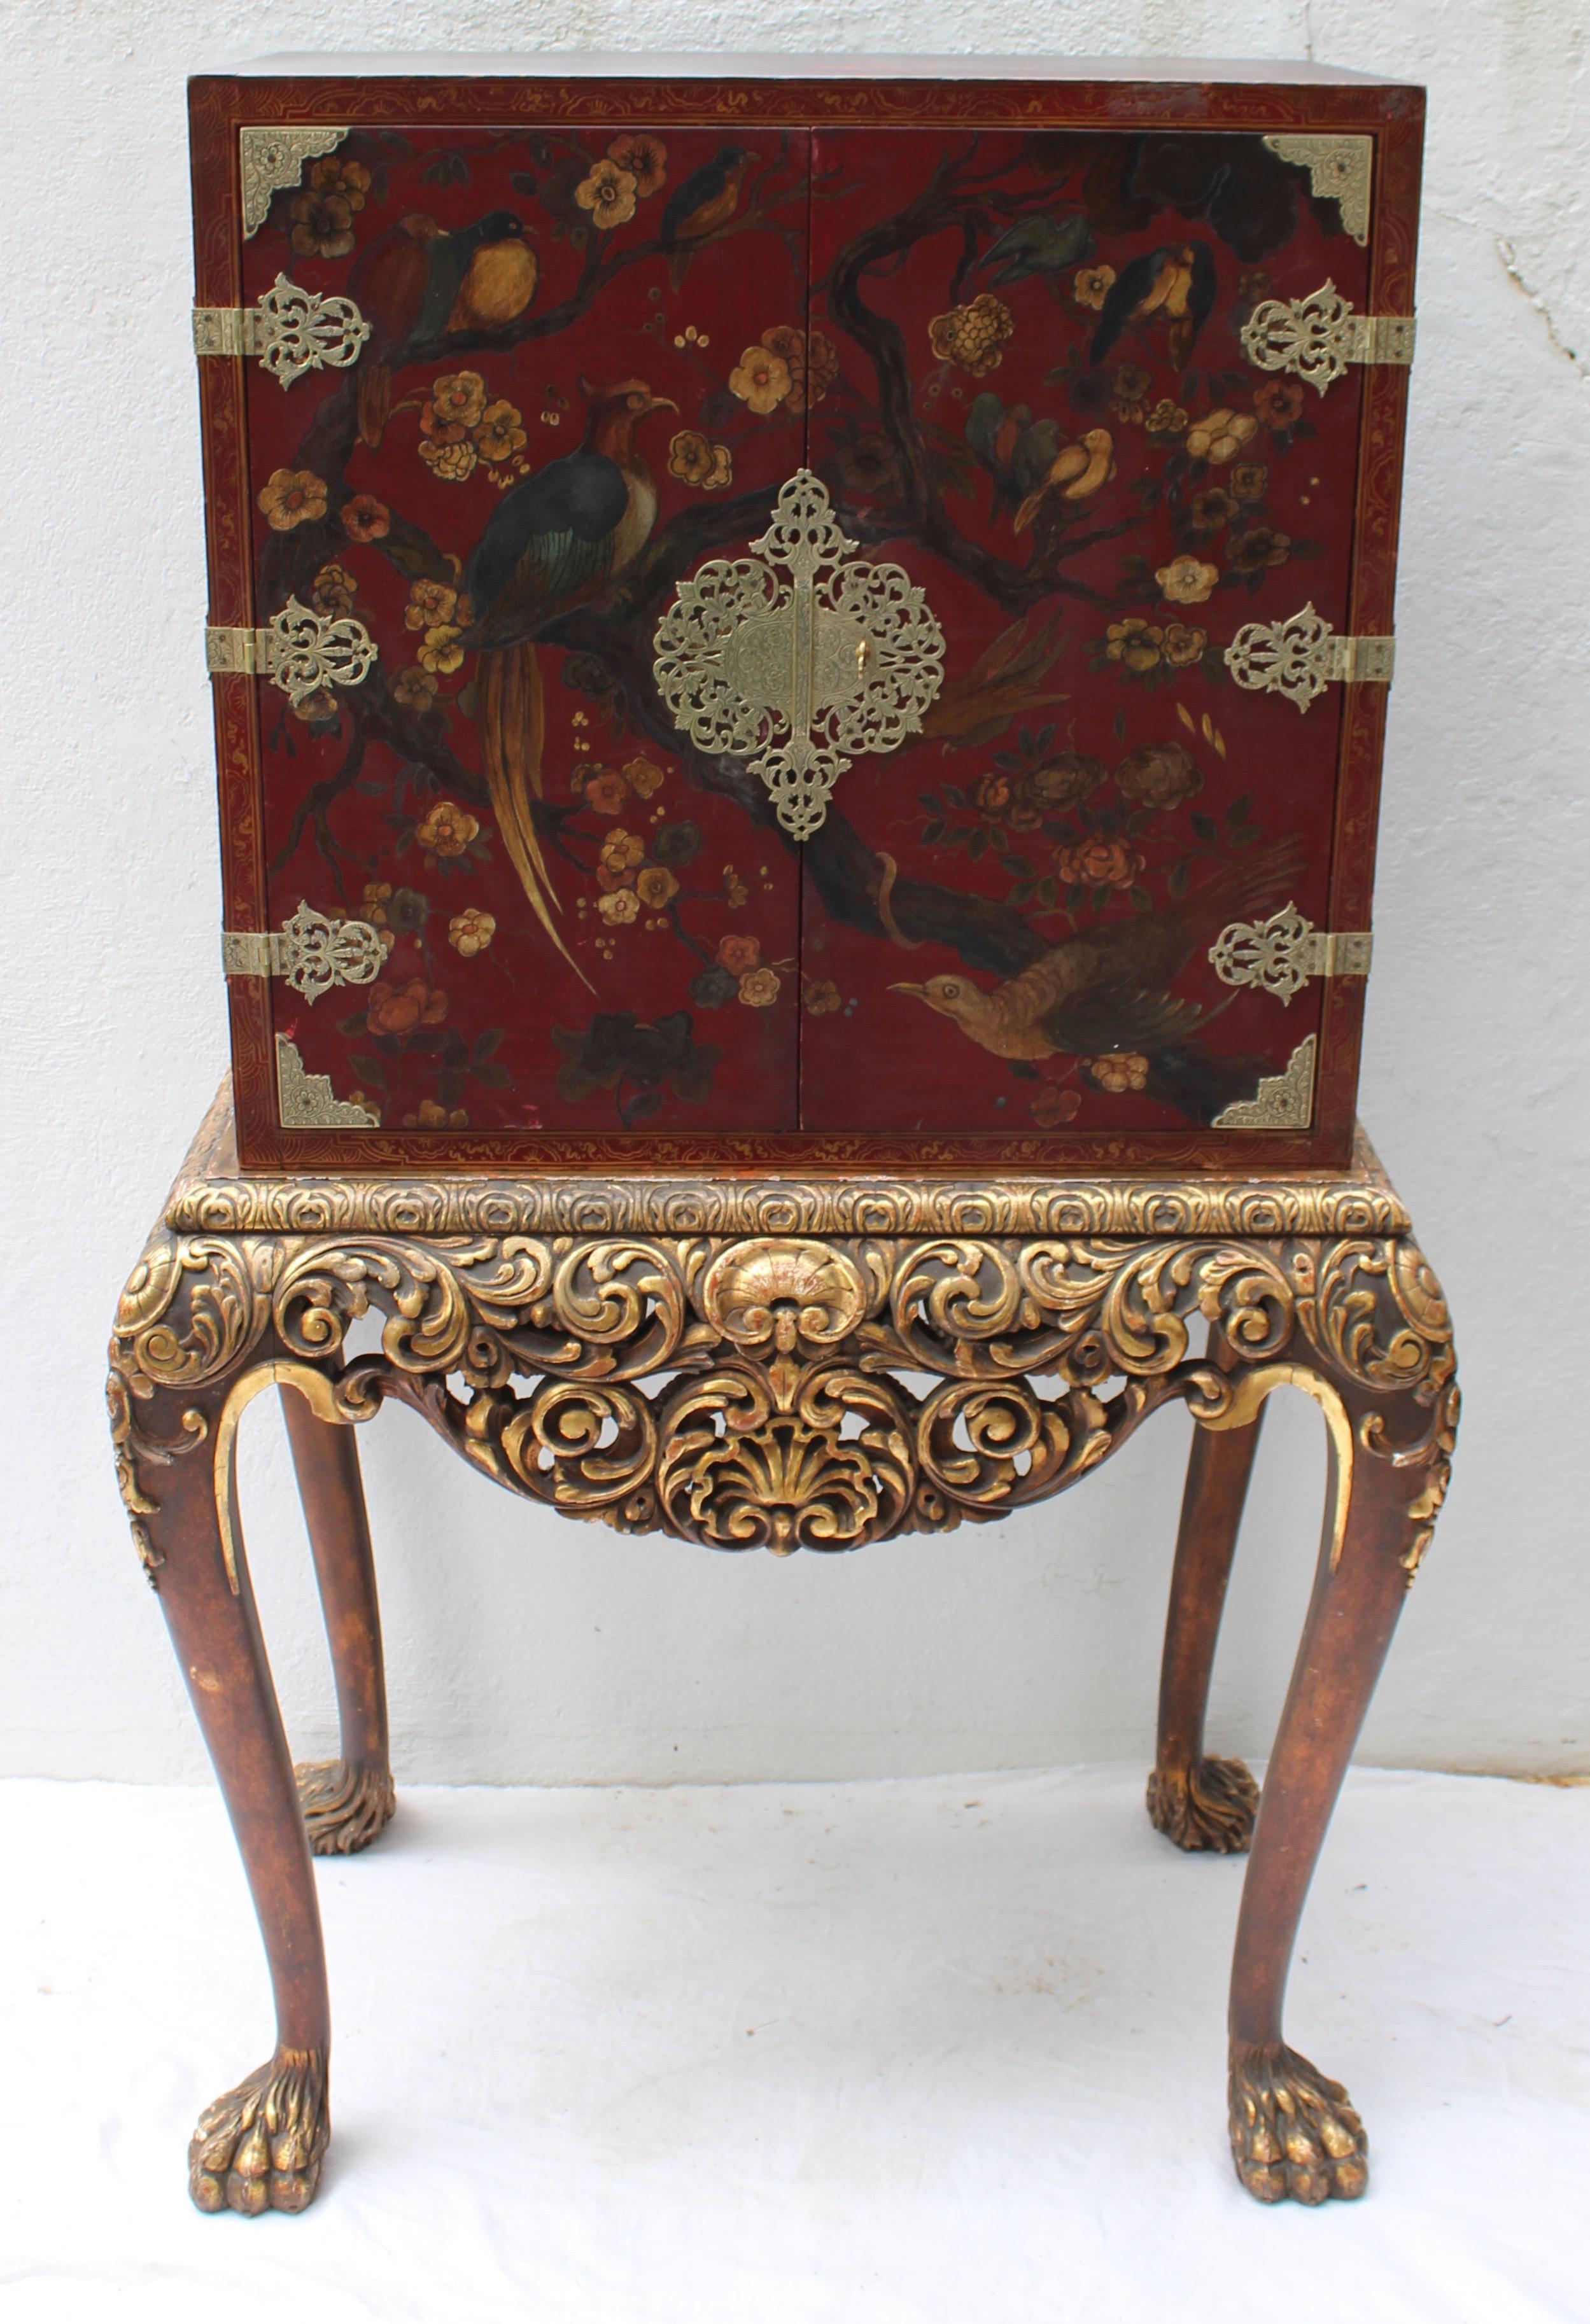 Two-door chinoiserie decorated cabinet on stand.

Cabinet without stand measures 29.75